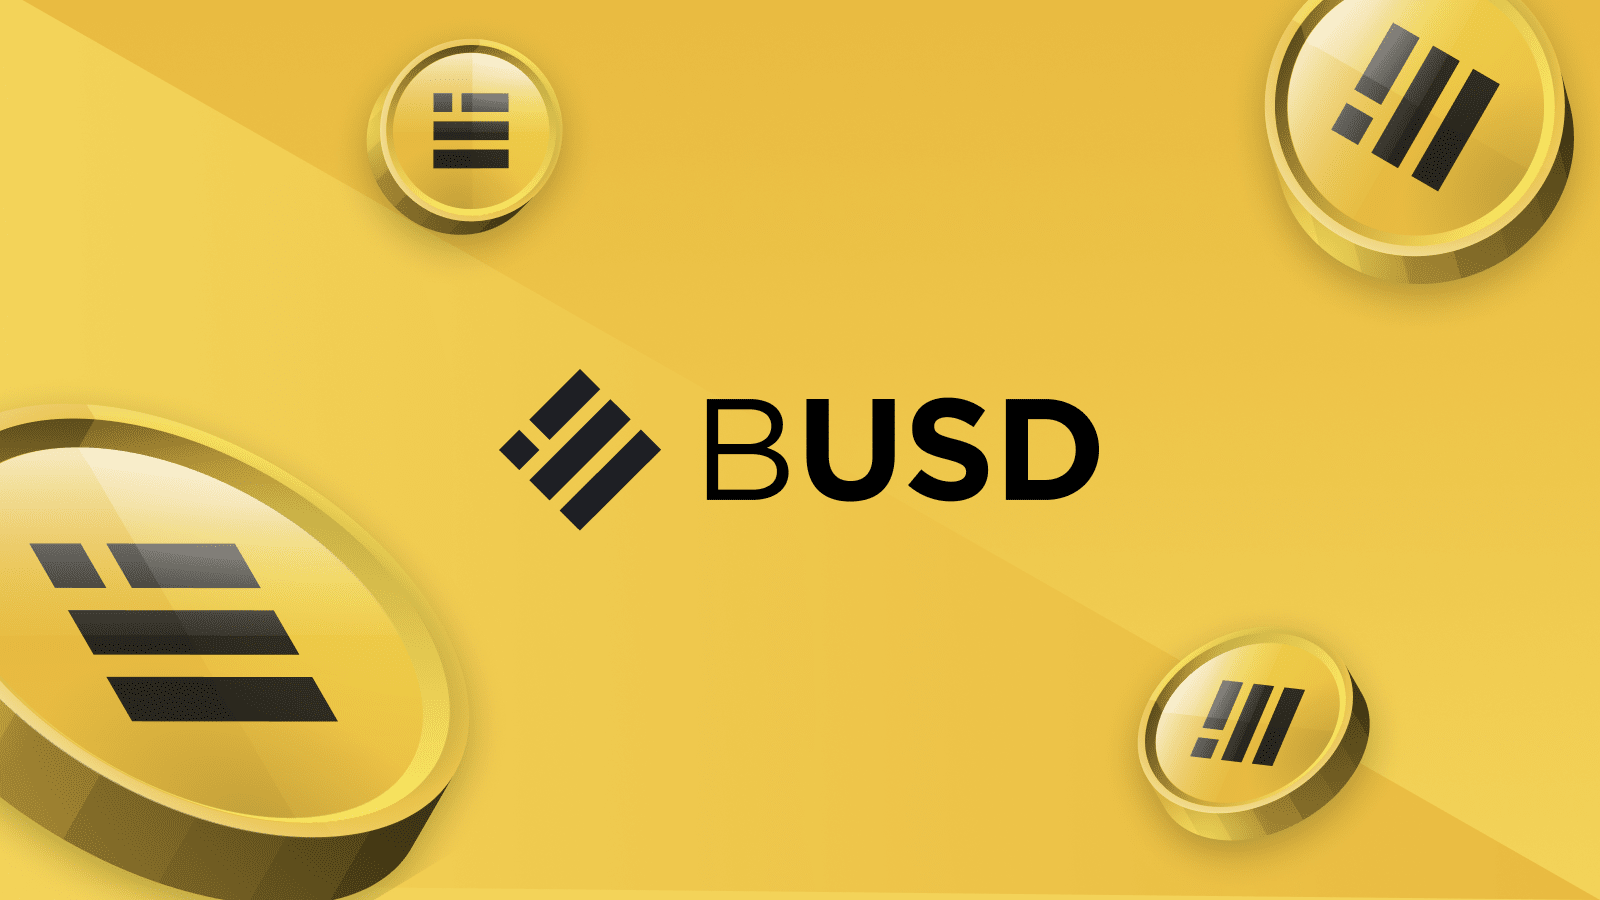 Binance Announces Cease of Support for BUSD Products